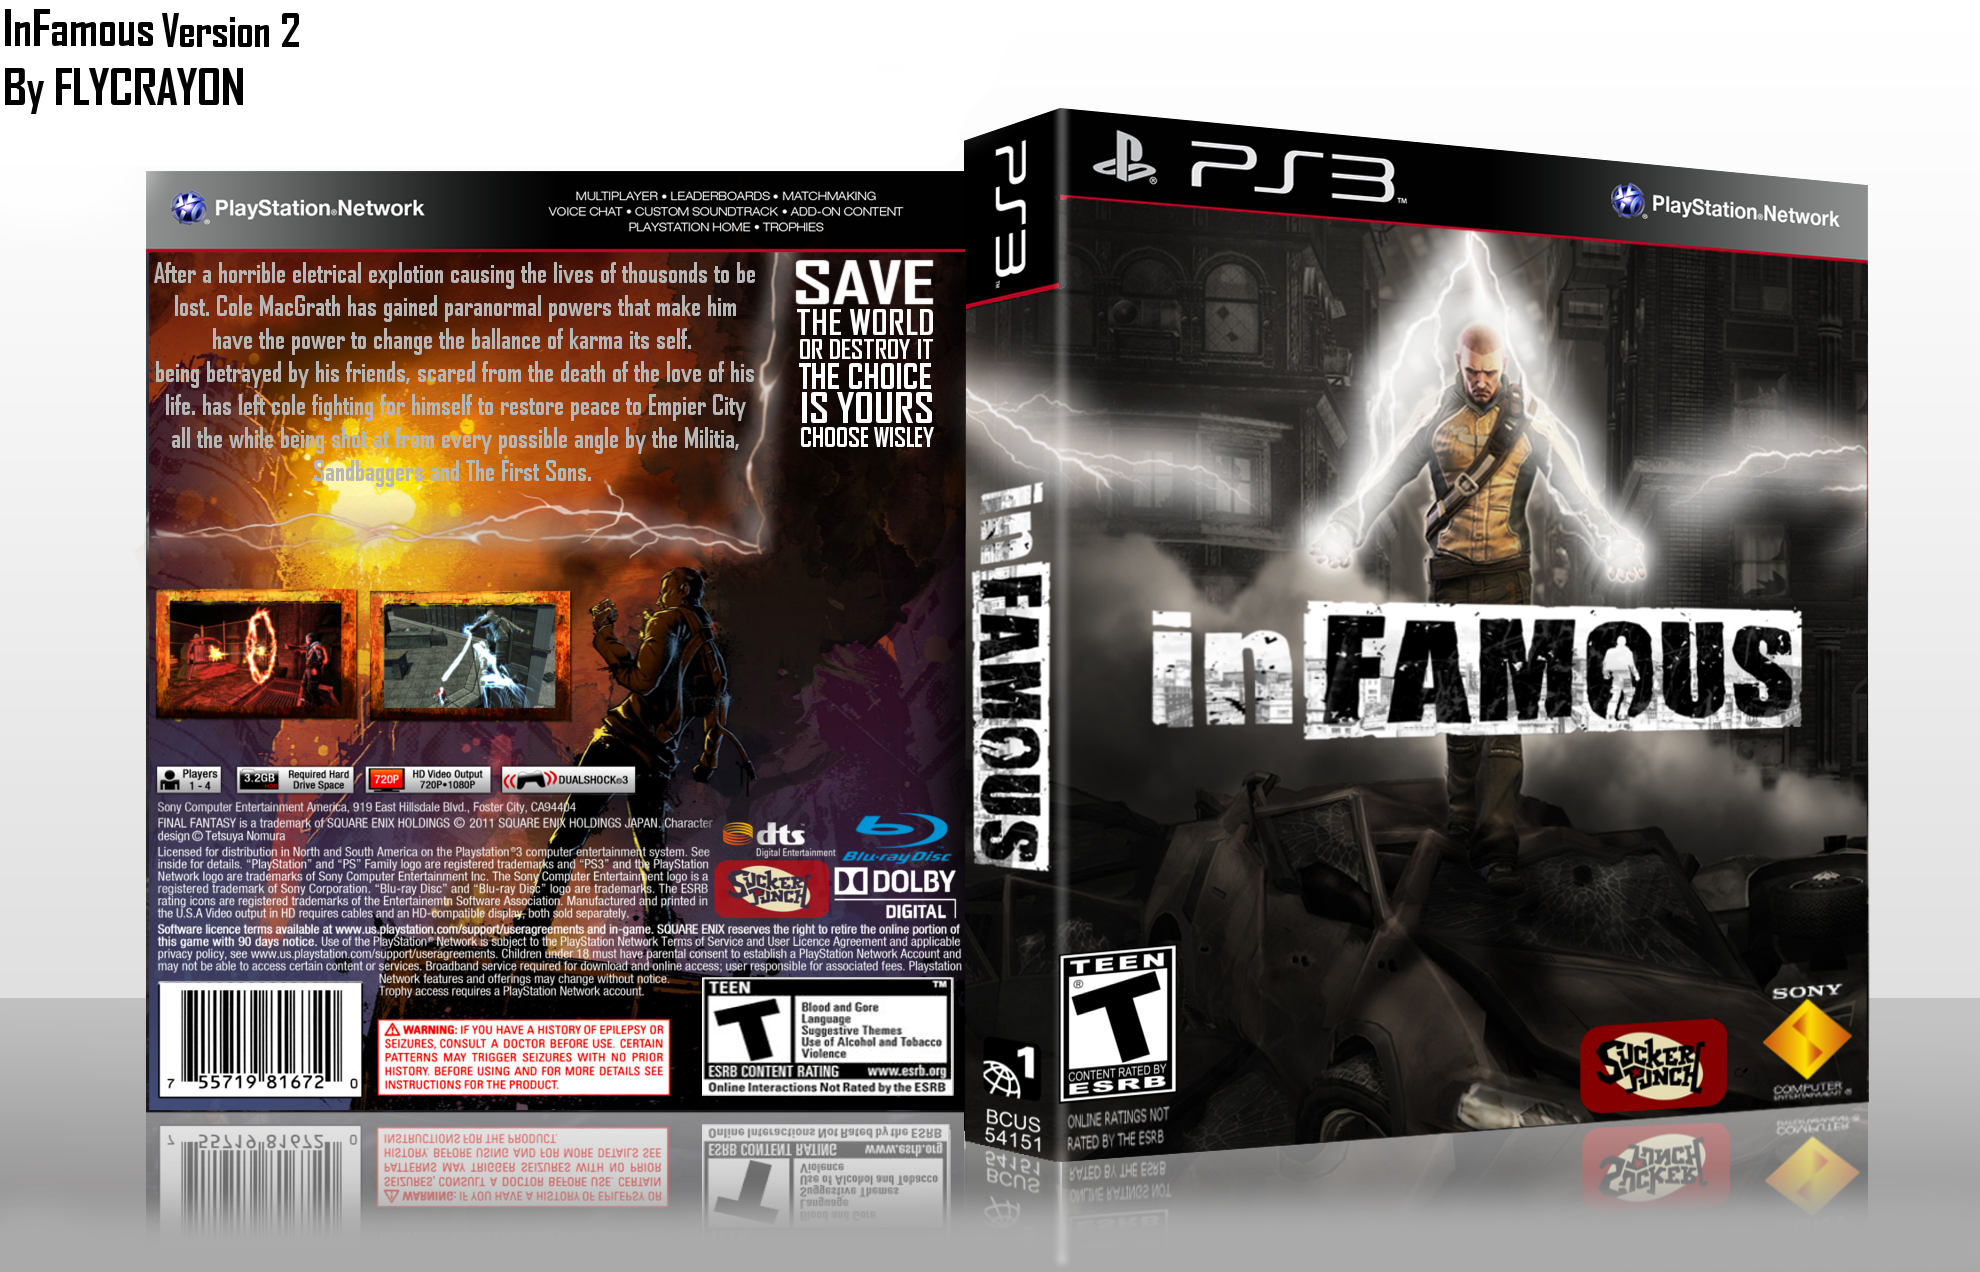 InFamous box cover